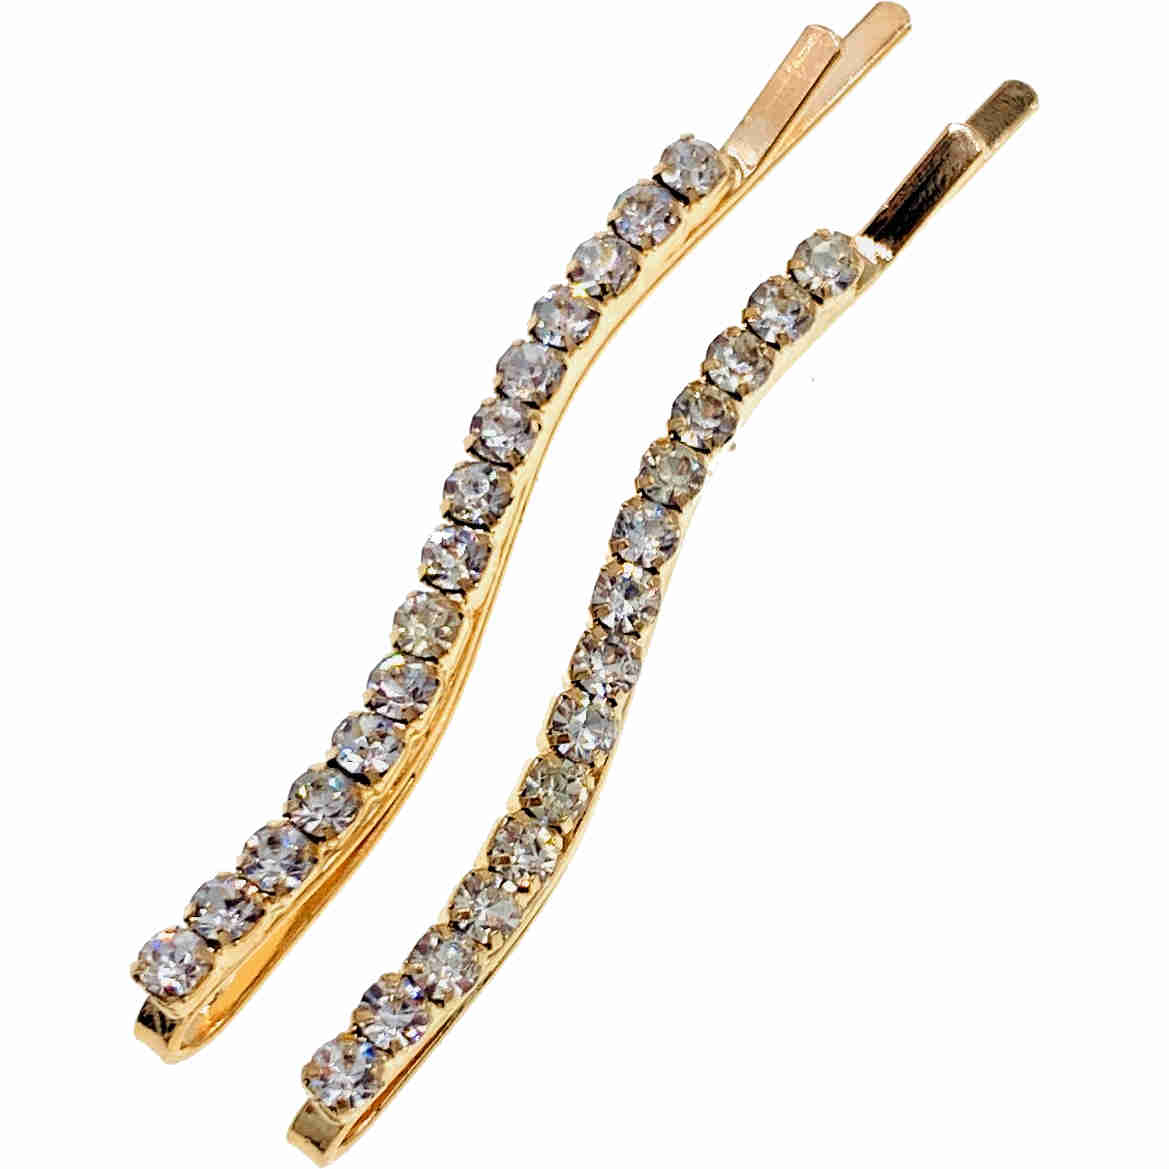 Simple Curving Bobby Pin Pair Rhinestone Crystal Silver Gold (2 colors)